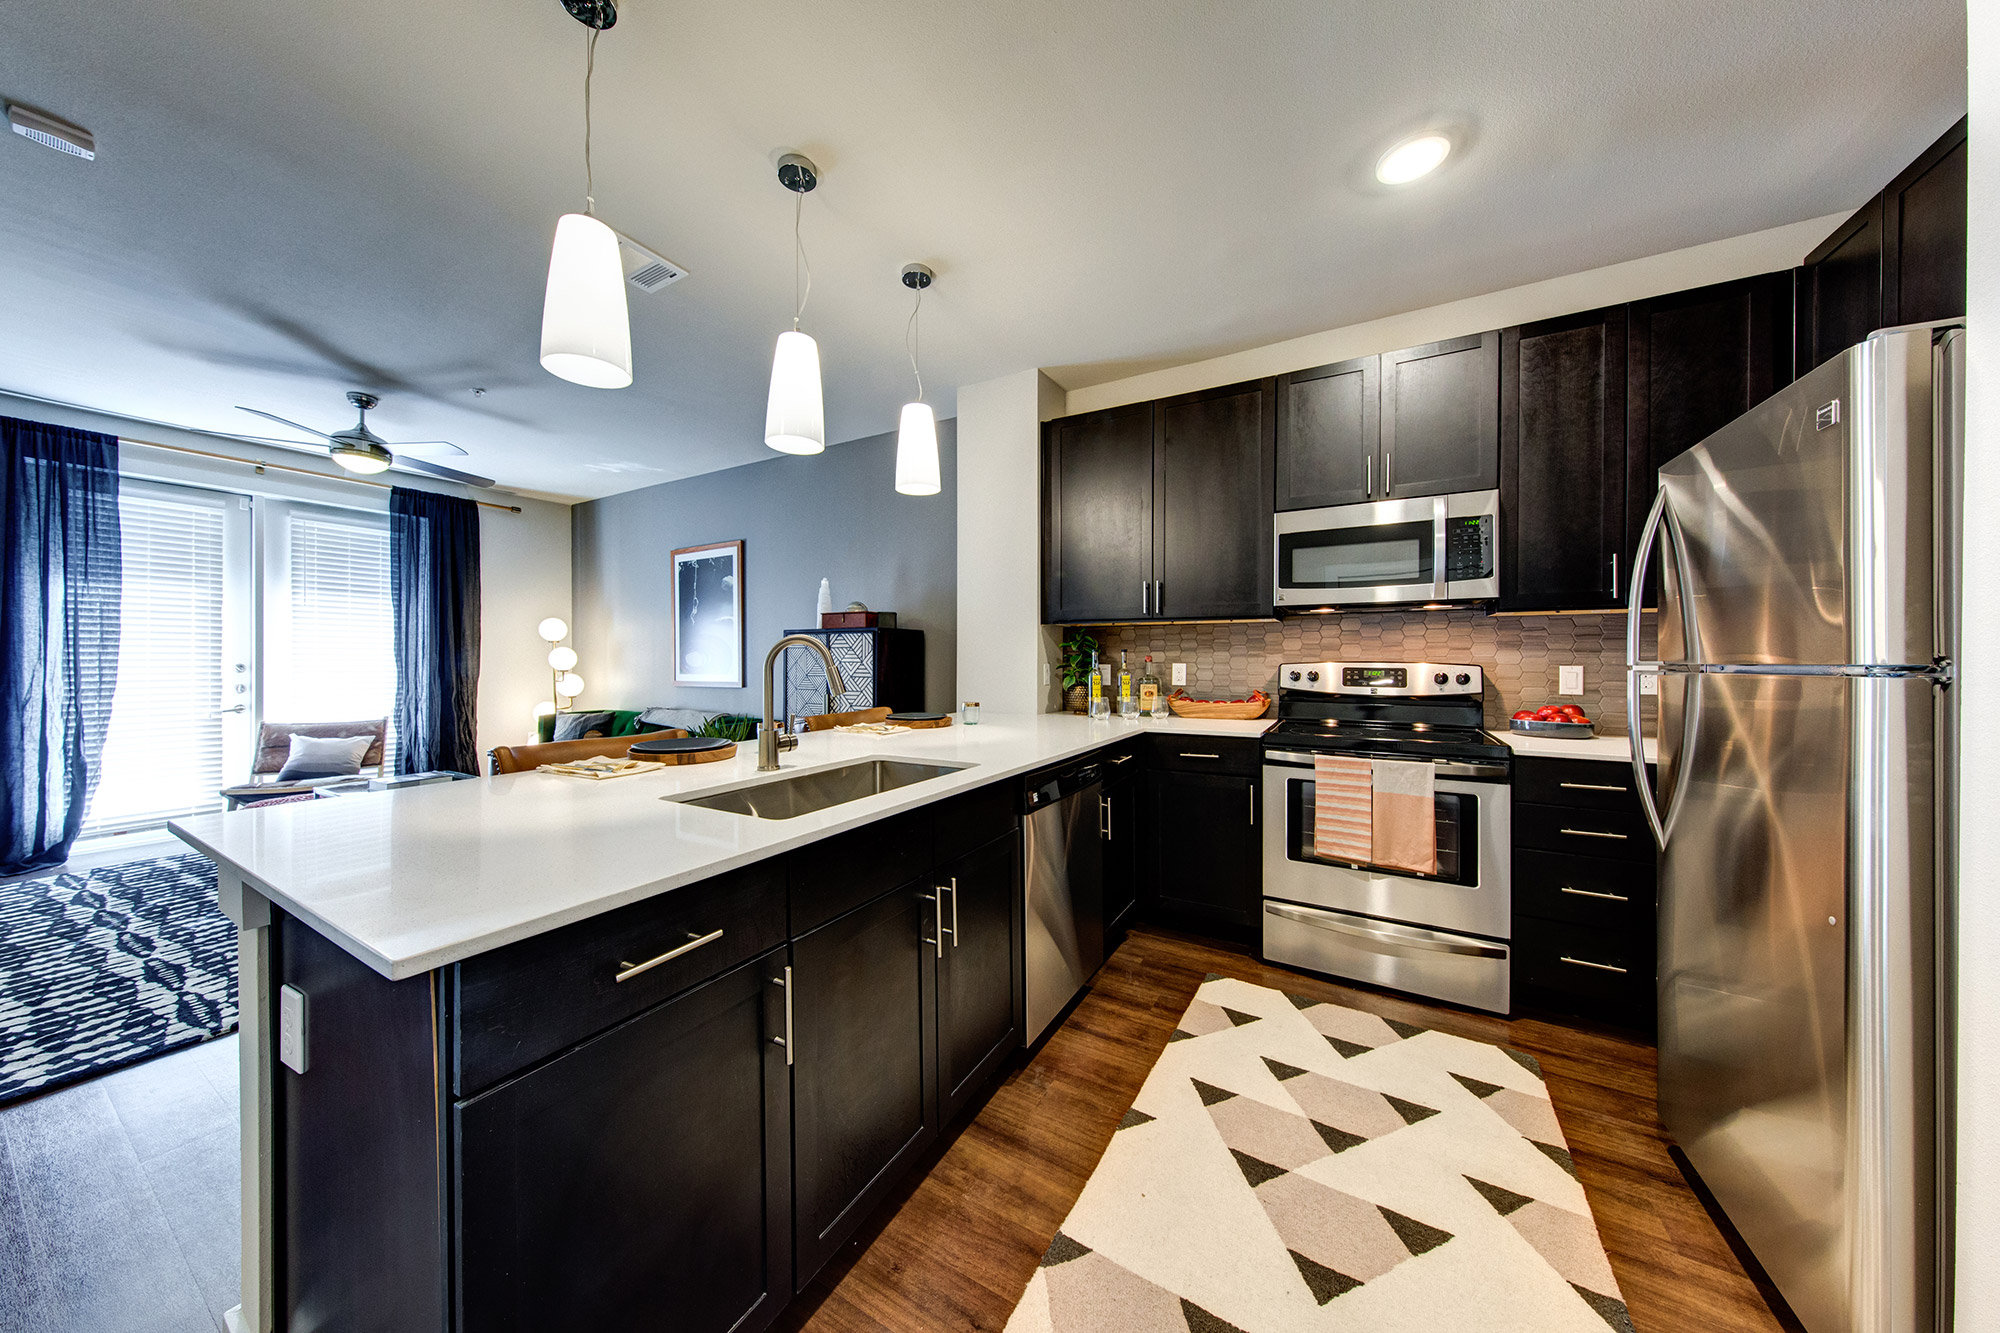 Kitchen with black cabinetry, wood-style floors, stainless steel appliances and quartz countertops that is open to the living room with double patio doors.